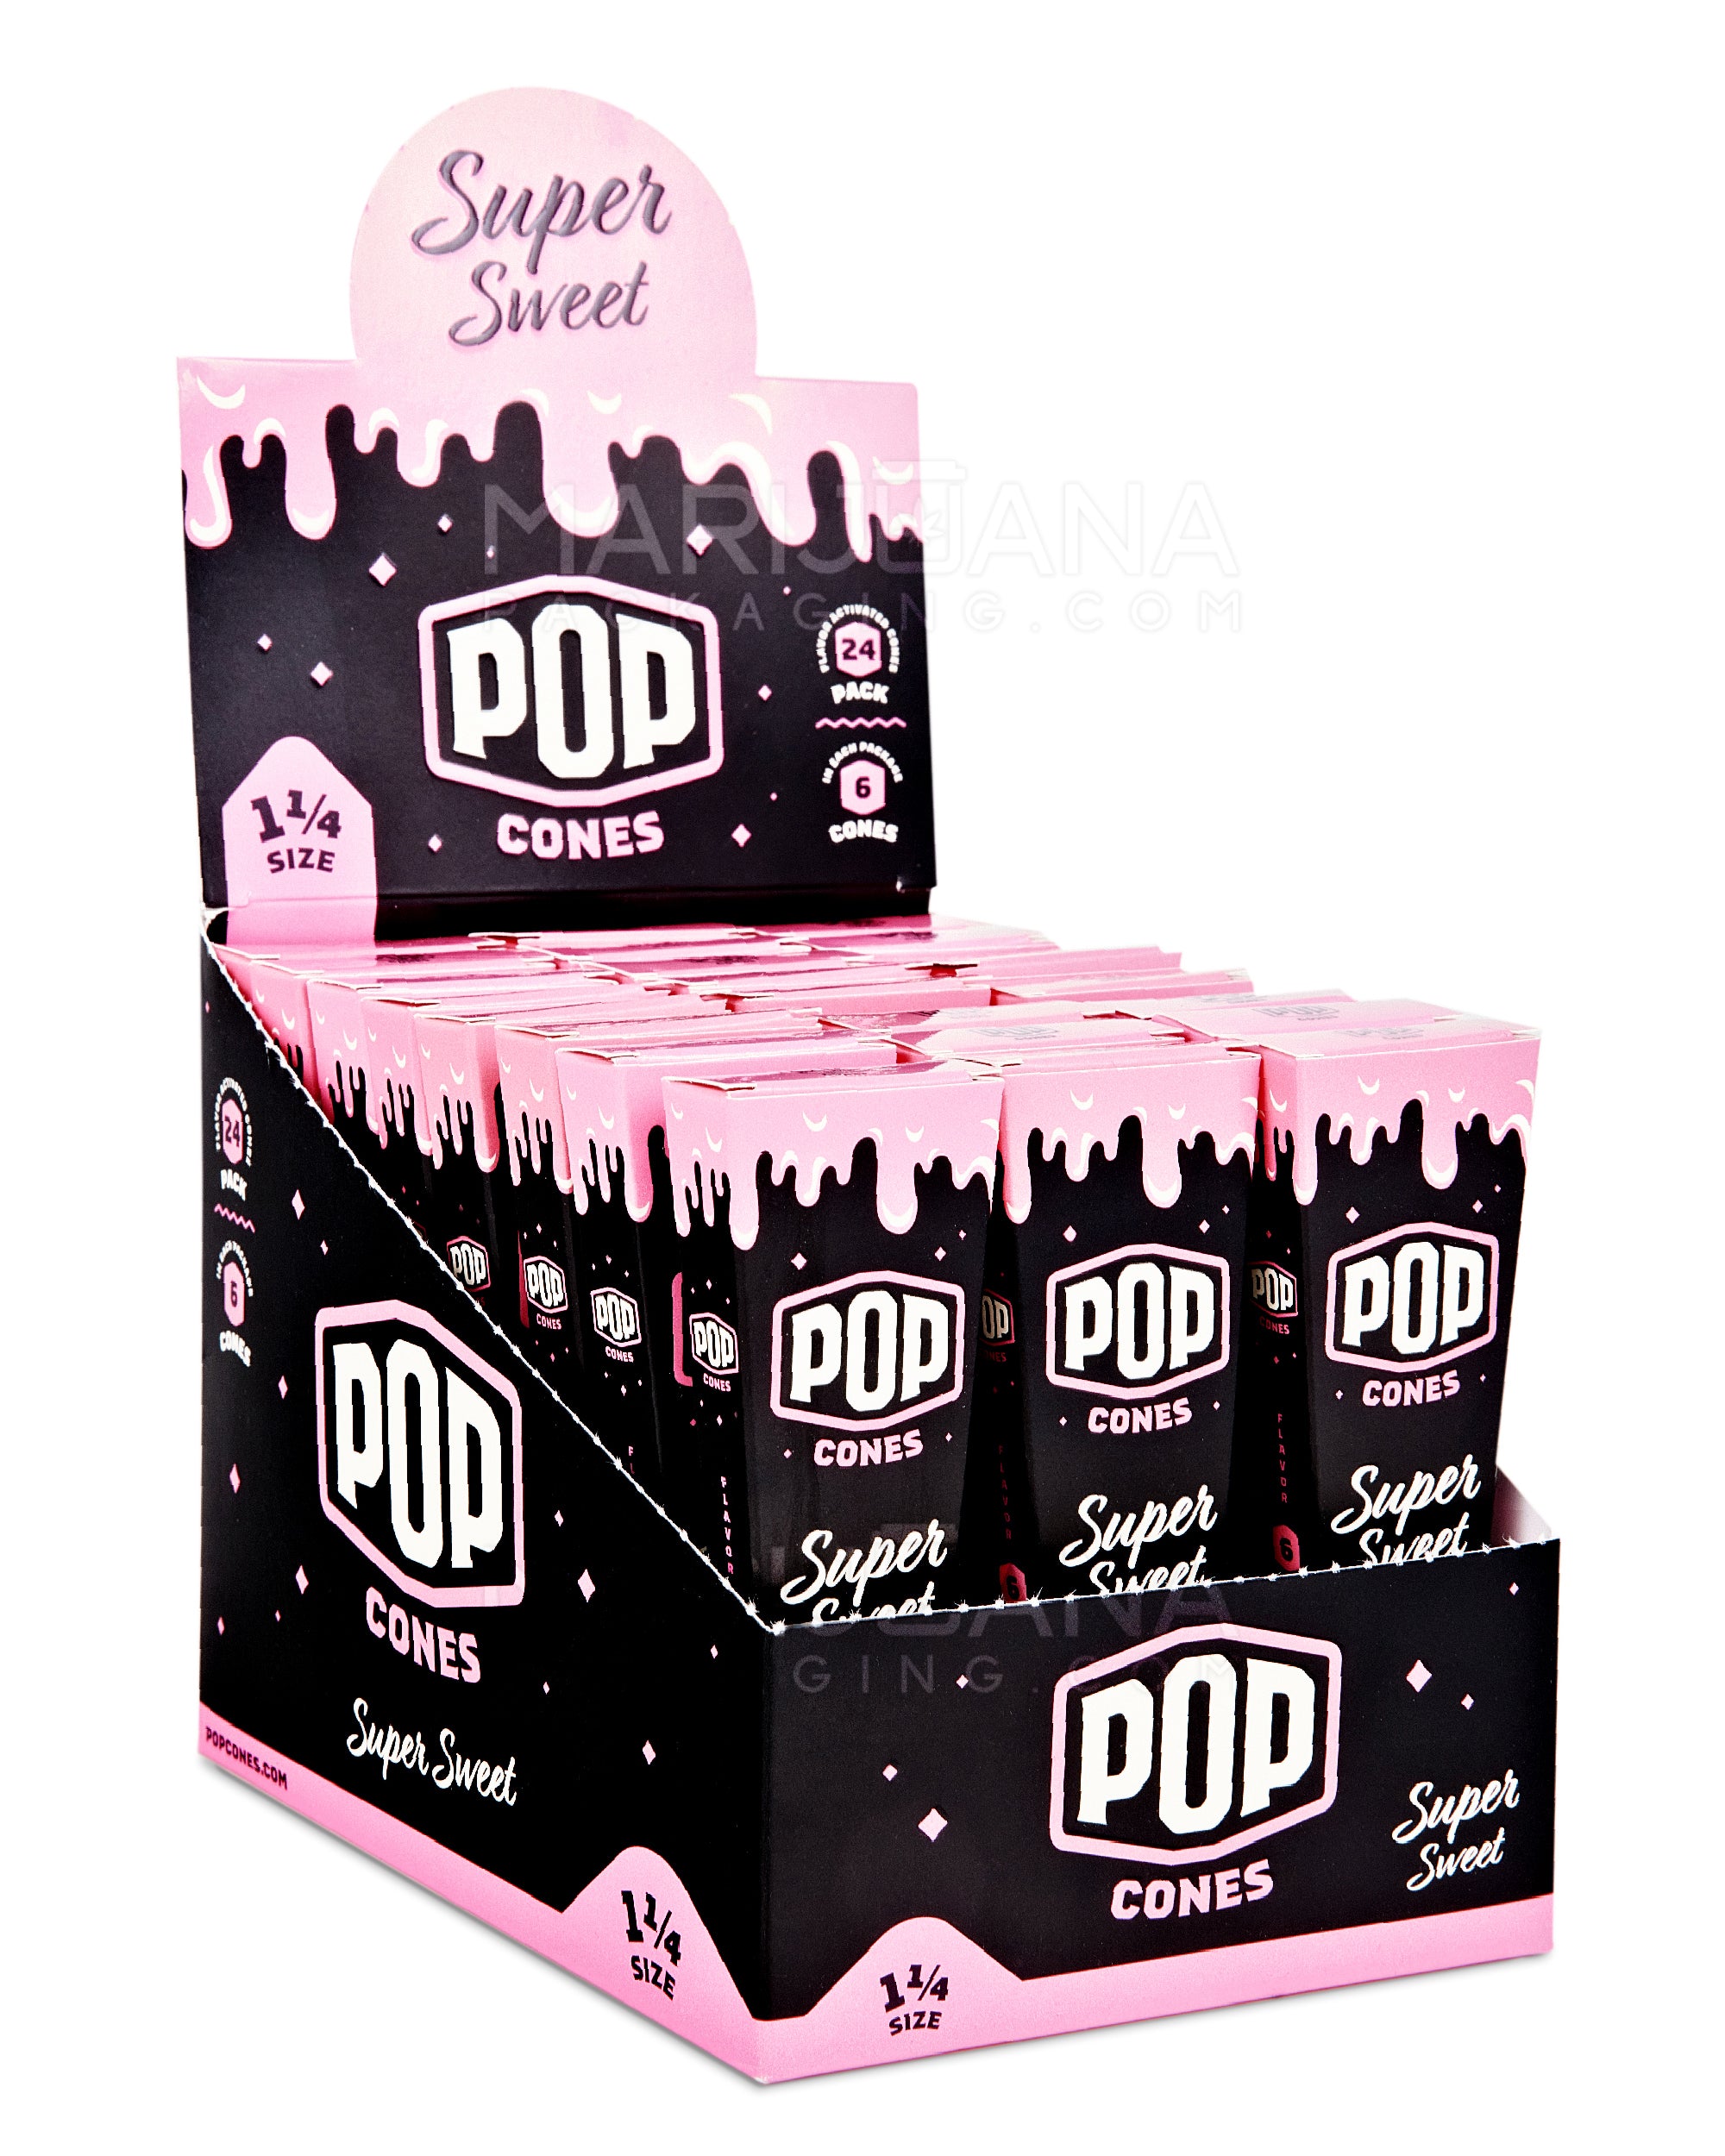 POP CONES | 'Retail Display' 1 1/4 Size Pre-Rolled Cones | 84mm - Super Sweet - 24 Count - 1